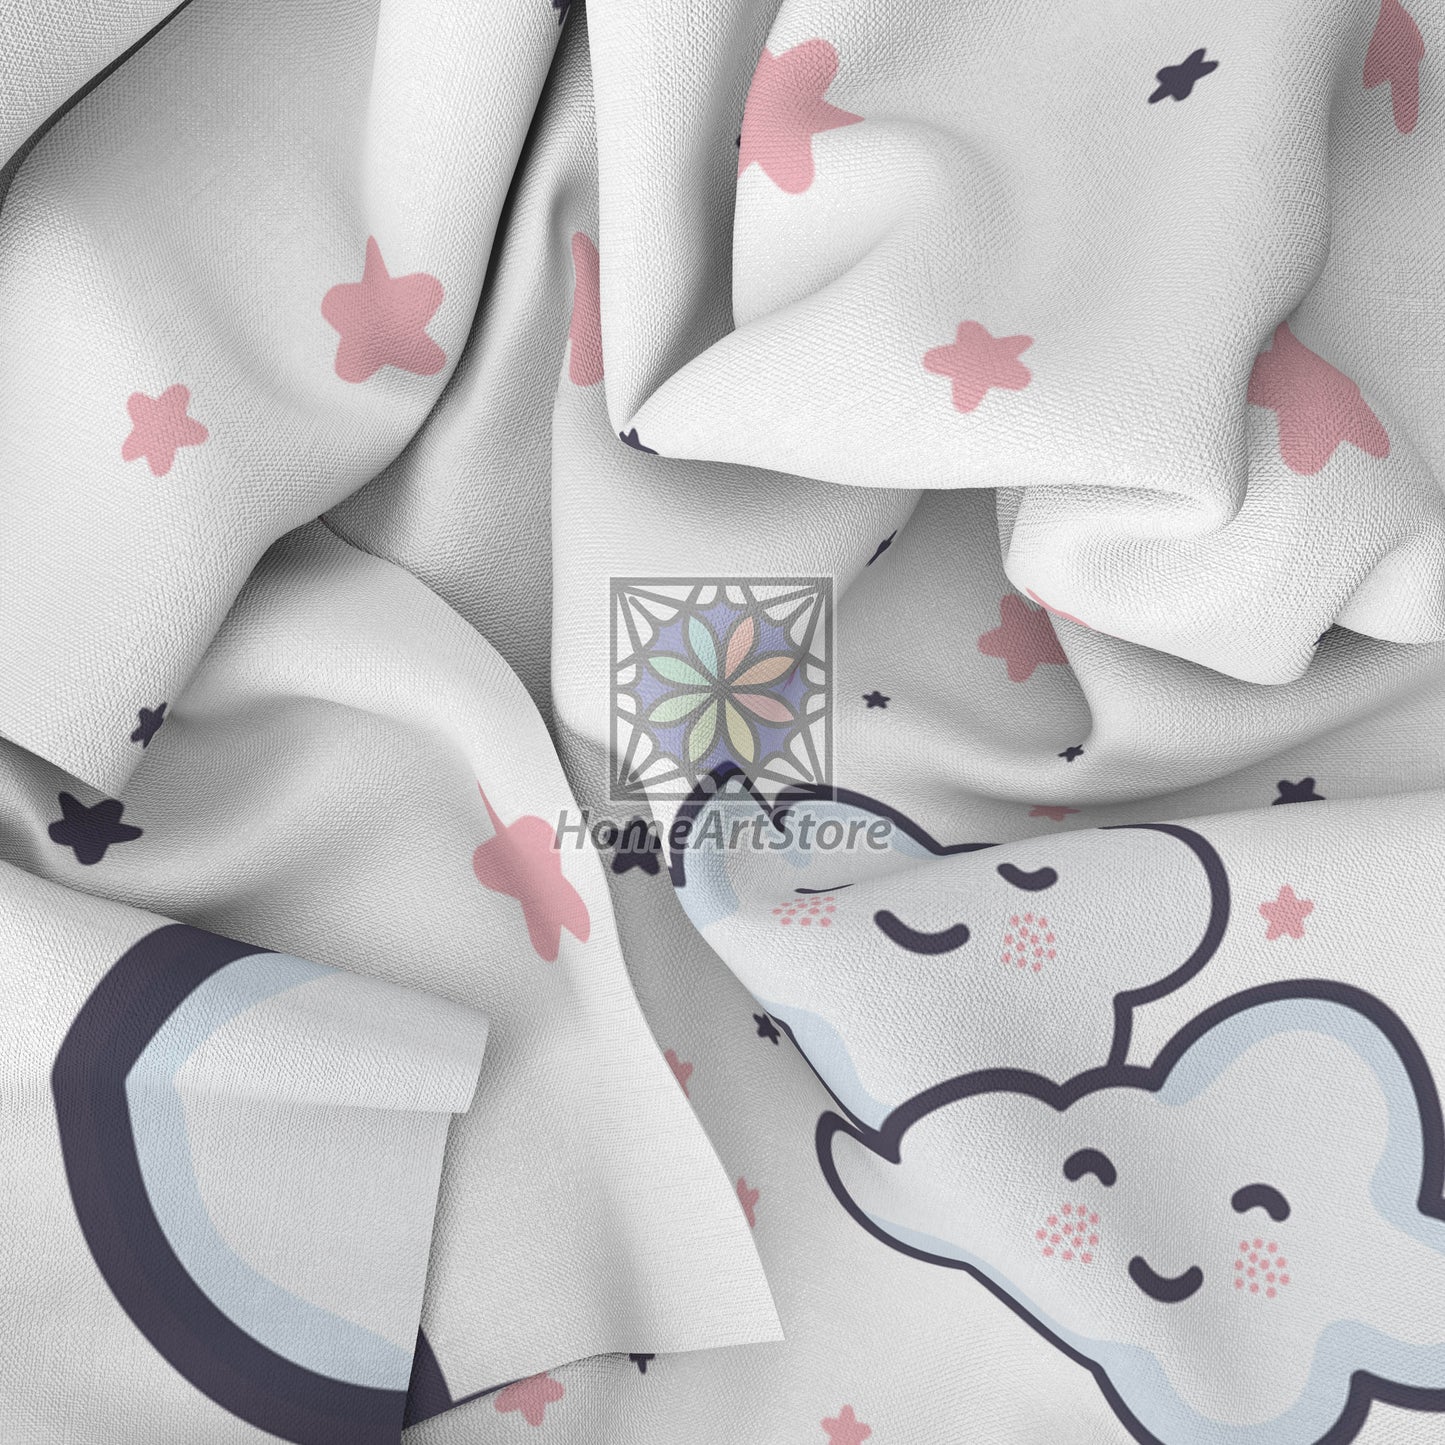 Cloud Themed Curtain, Star Pattern Curtain, Baby Room Curtain, Cute Kids Room Decor, Baby Shower Gift